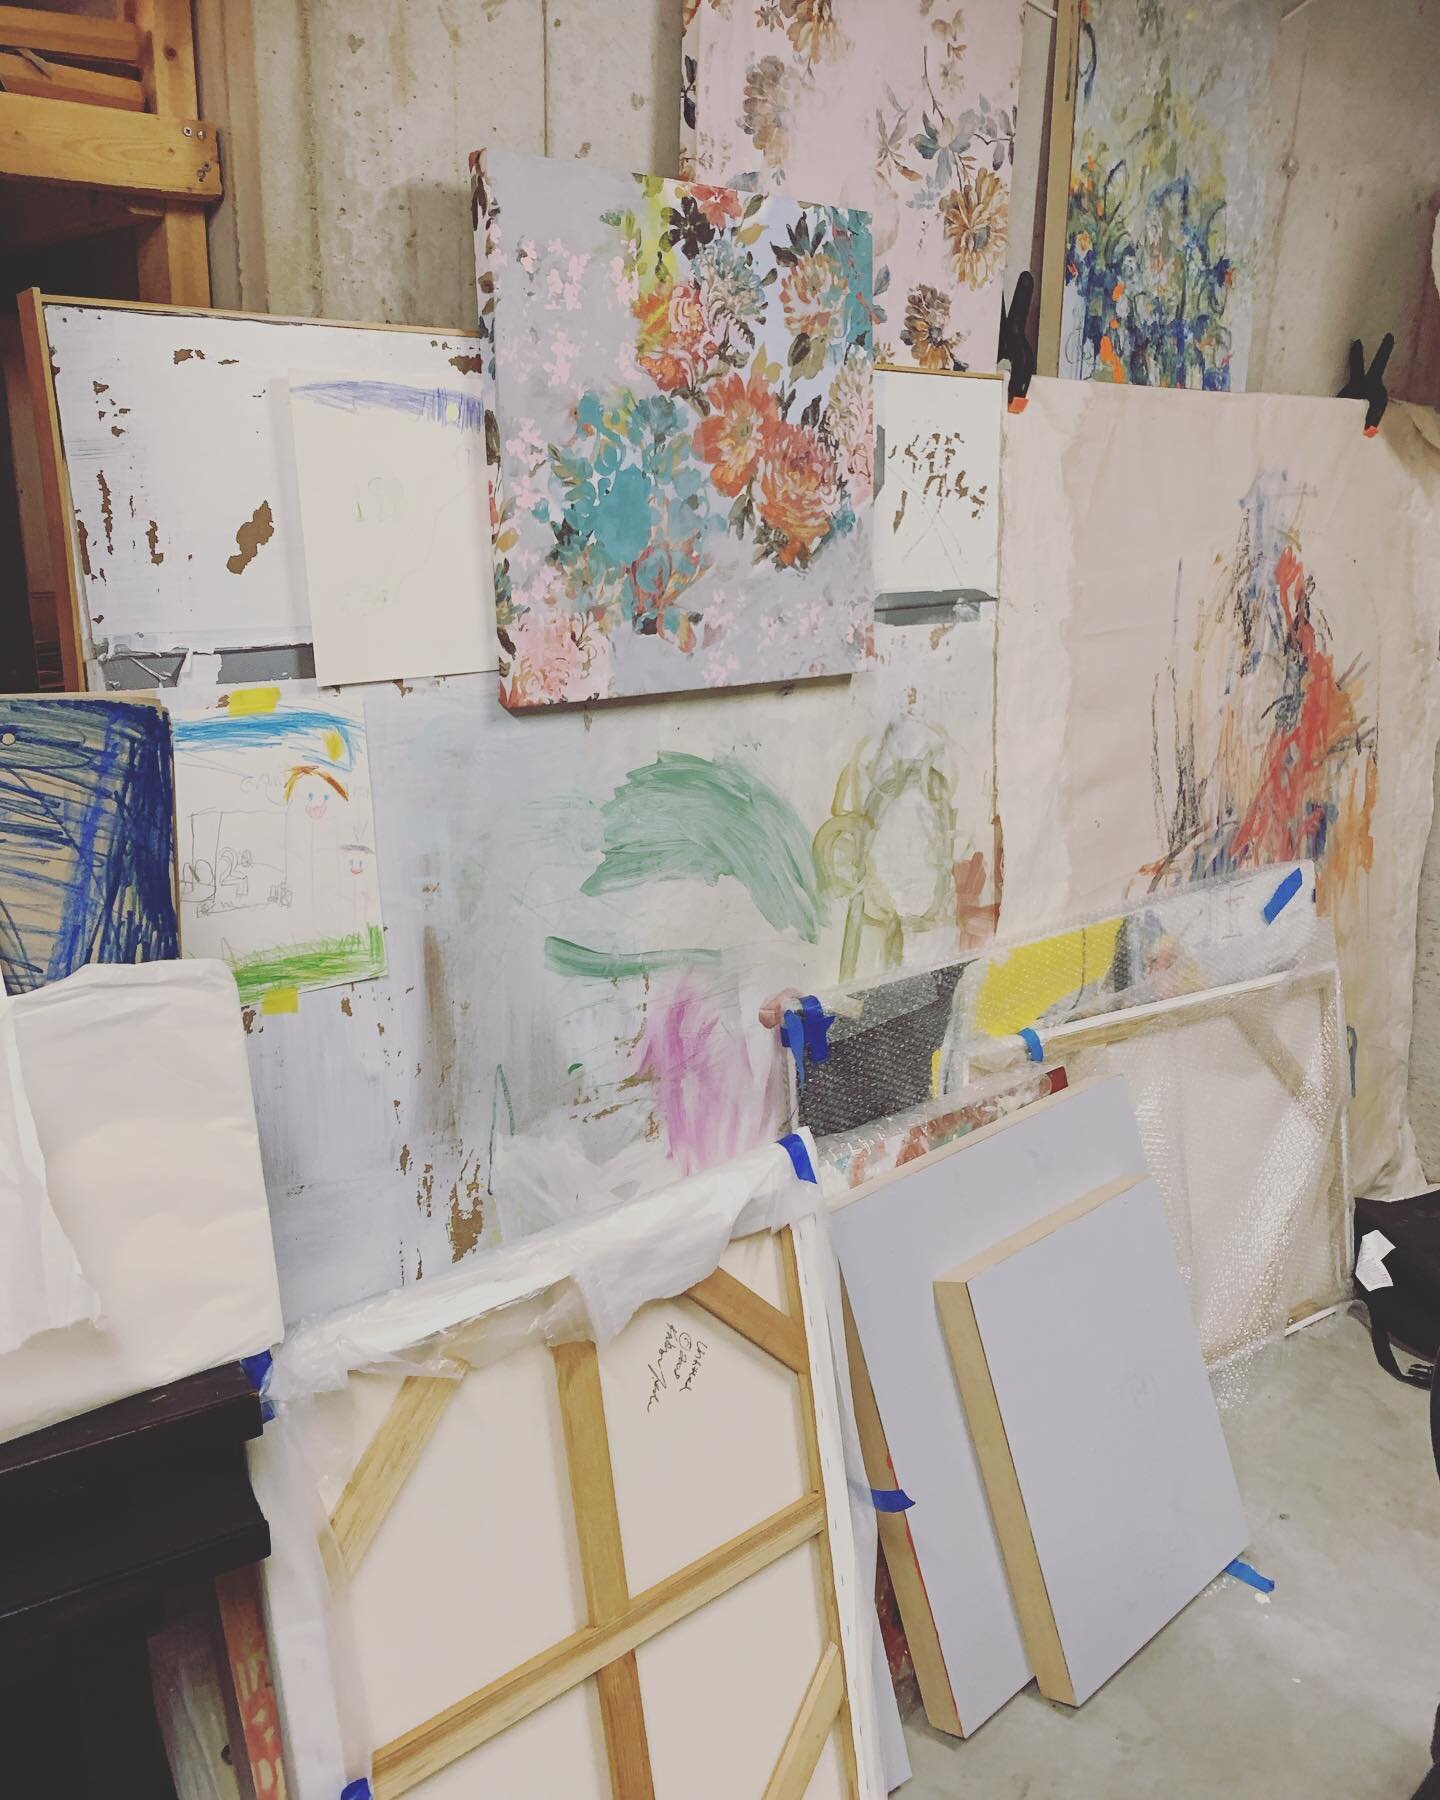 Winding down from bust summer months!
It takes me a while to recalibrate back into my studio. There&rsquo;s a restlessness that subtly begins. I find myself sitting in my studio first, gazing at unfinished work thinking. Then I start going thru old m